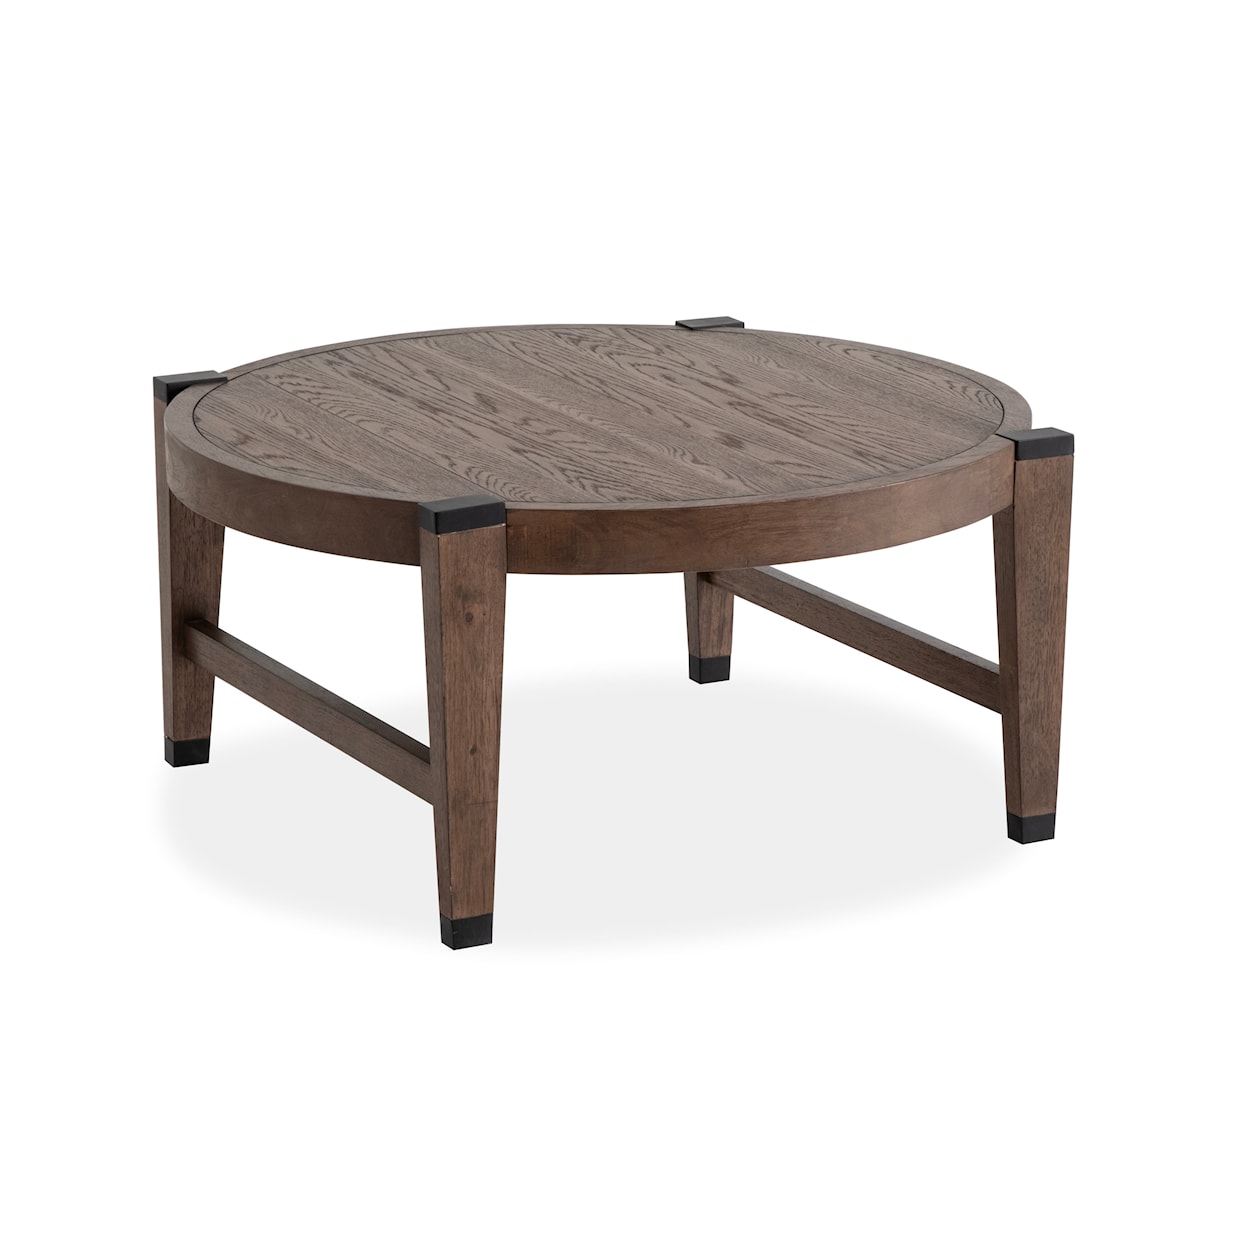 Magnussen Home Kaysen Tables Round Cocktail Table